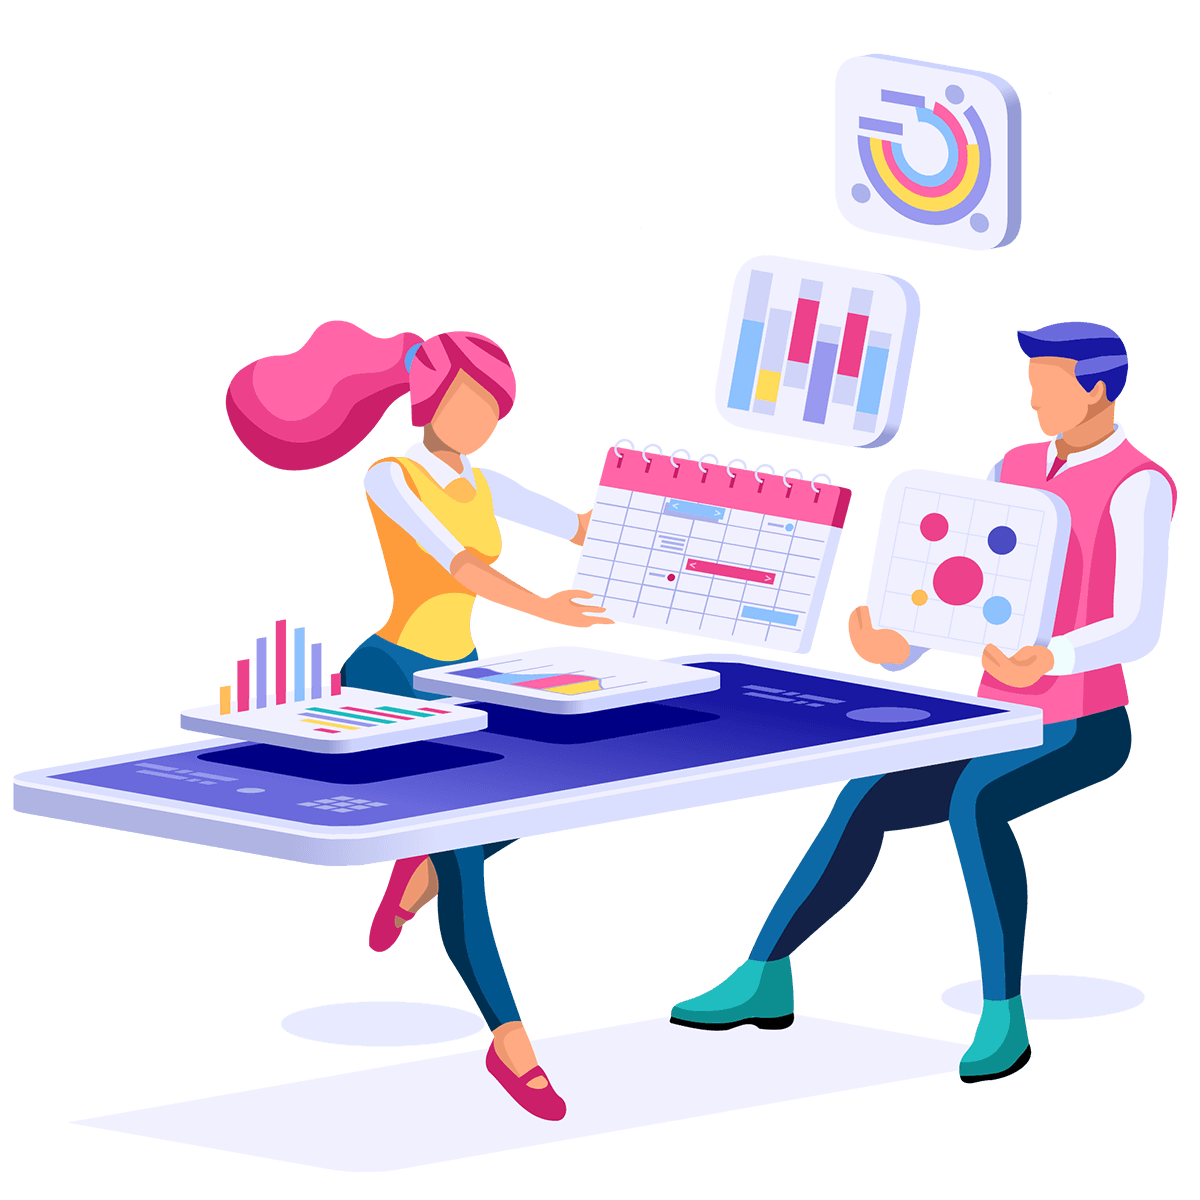 The illustrated woman and man go through marketing automation services at the table